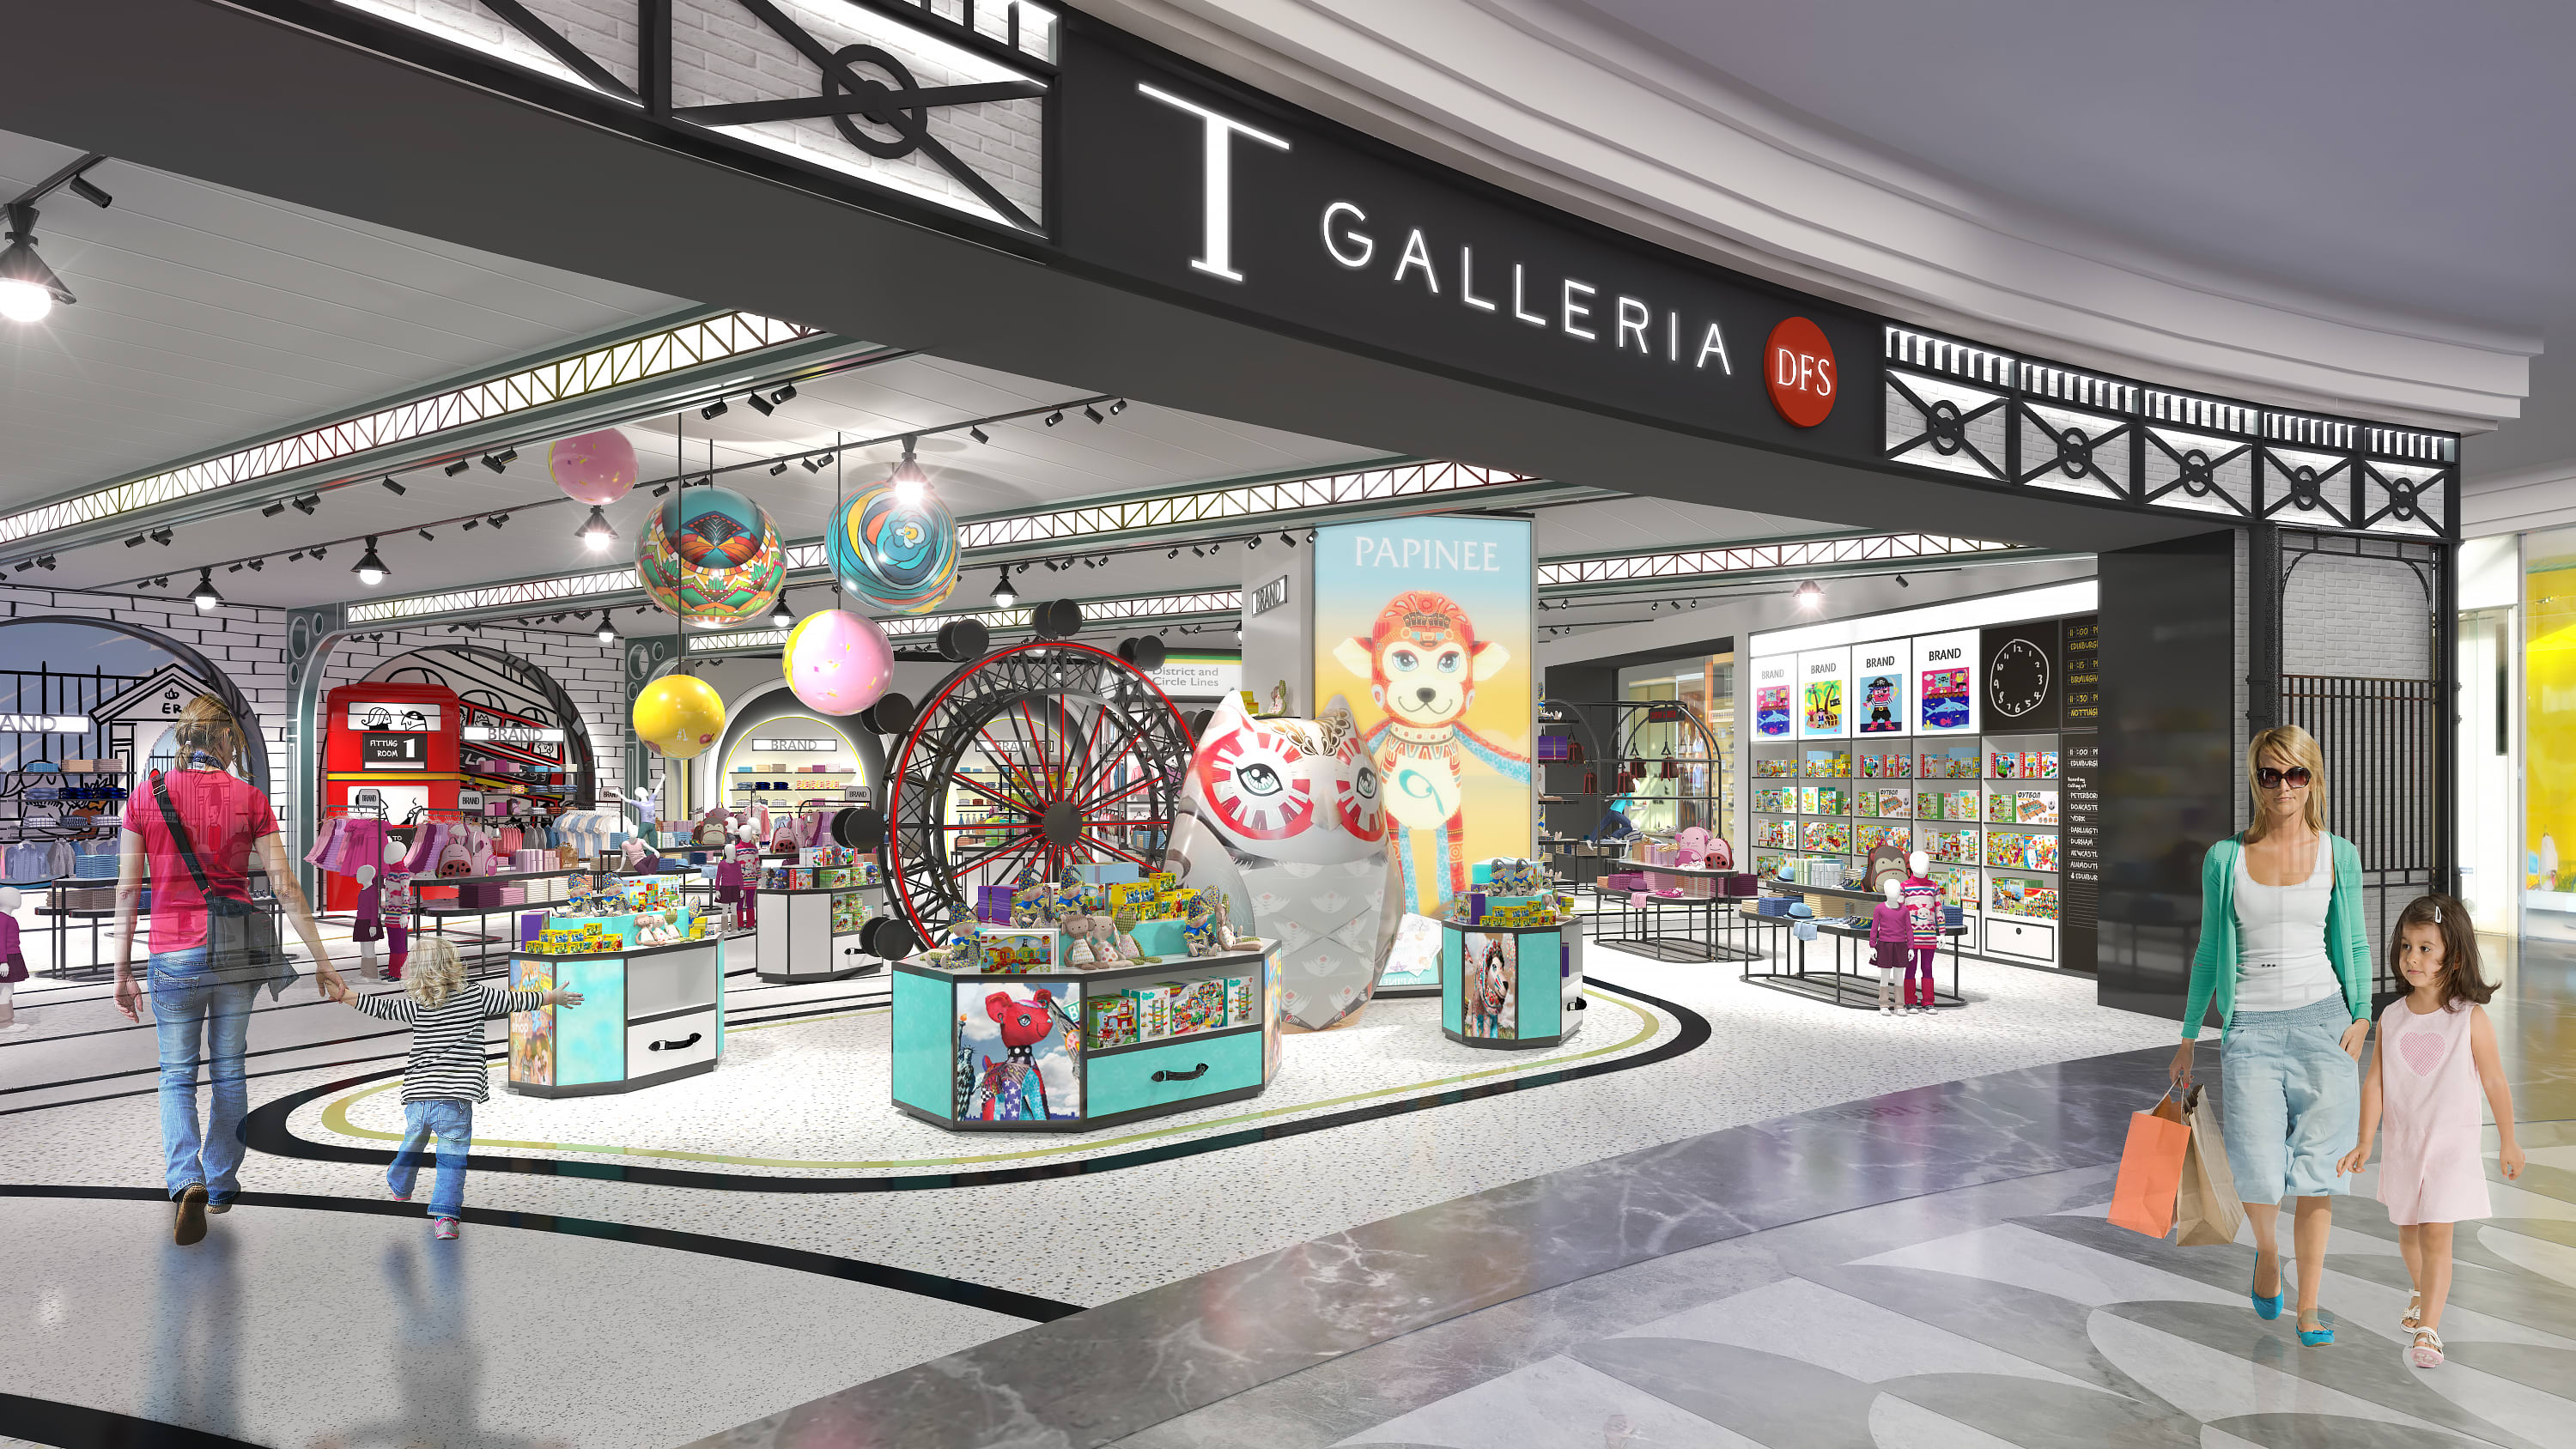 DFS Group S/S 2014 campaign for T Galleria, Hong Kong